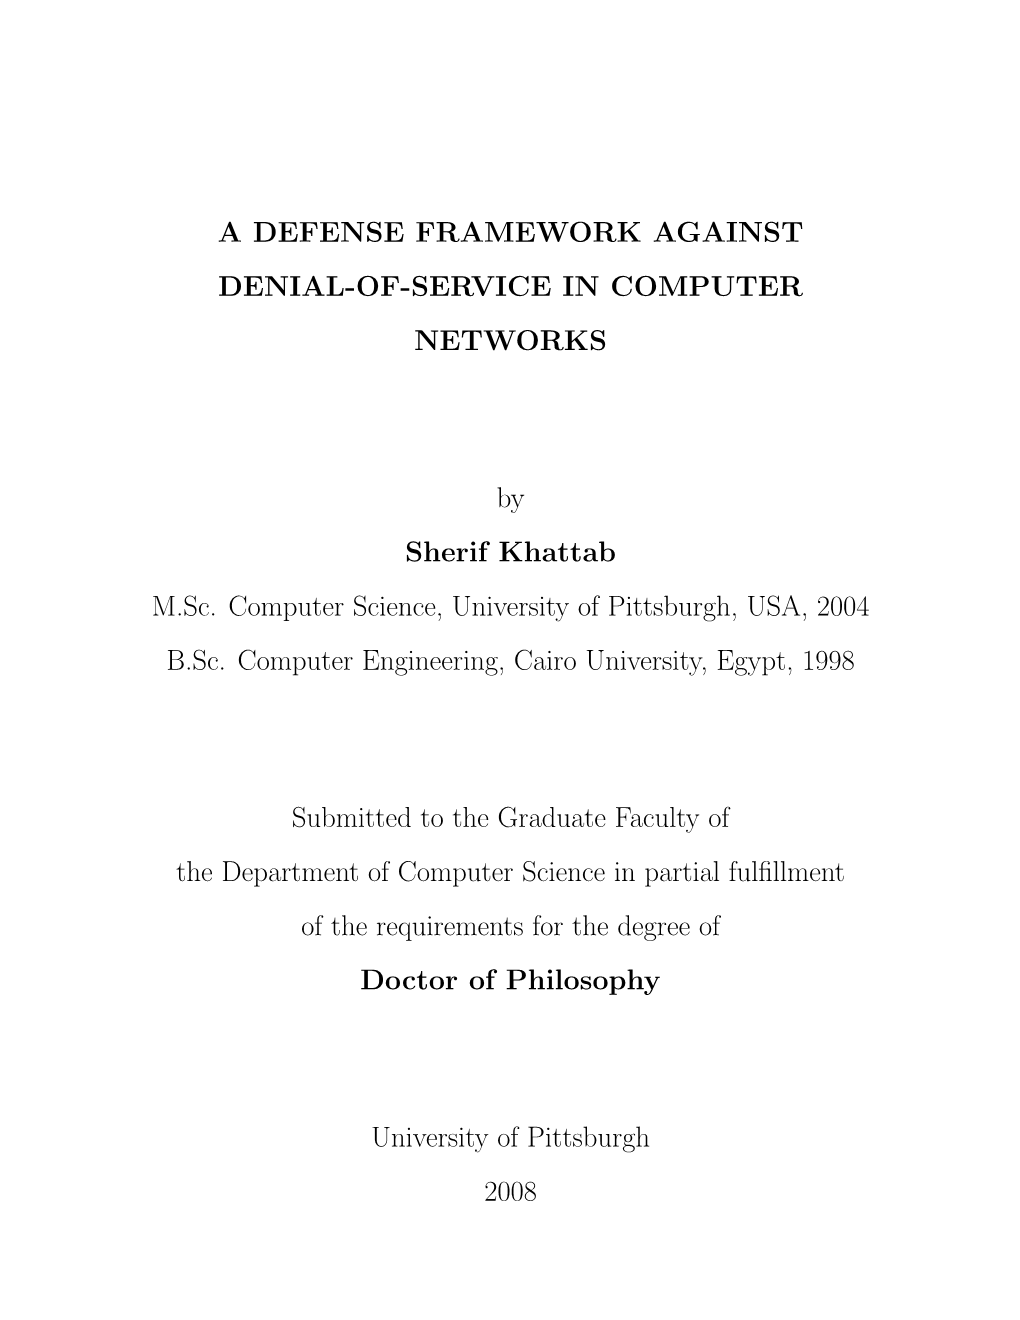 A Defense Framework Against Denial-Of-Service in Computer Networks